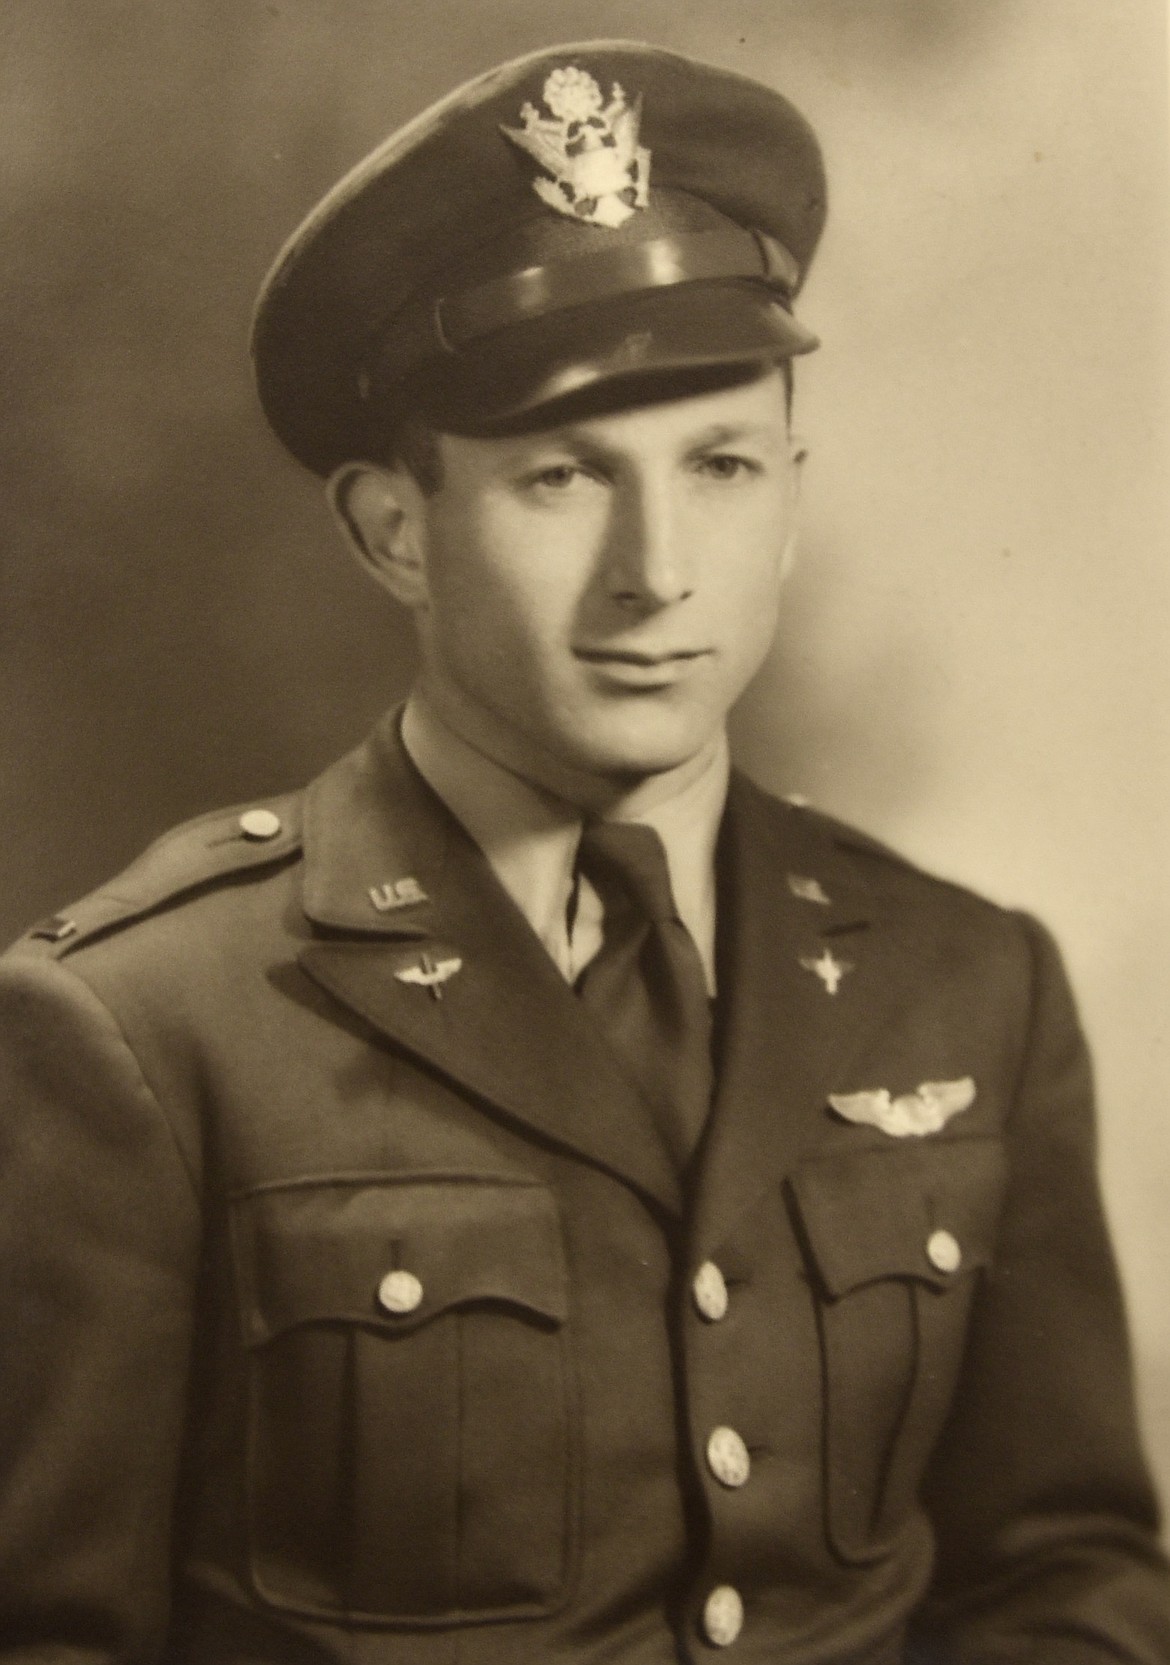 1st Lt. Jack McWilliams of Somers. McWilliams, a P-47 Thunderbolt pilot, was shot down over Europe in January 1945. (Photo courtesy Janice Sterner Jones)